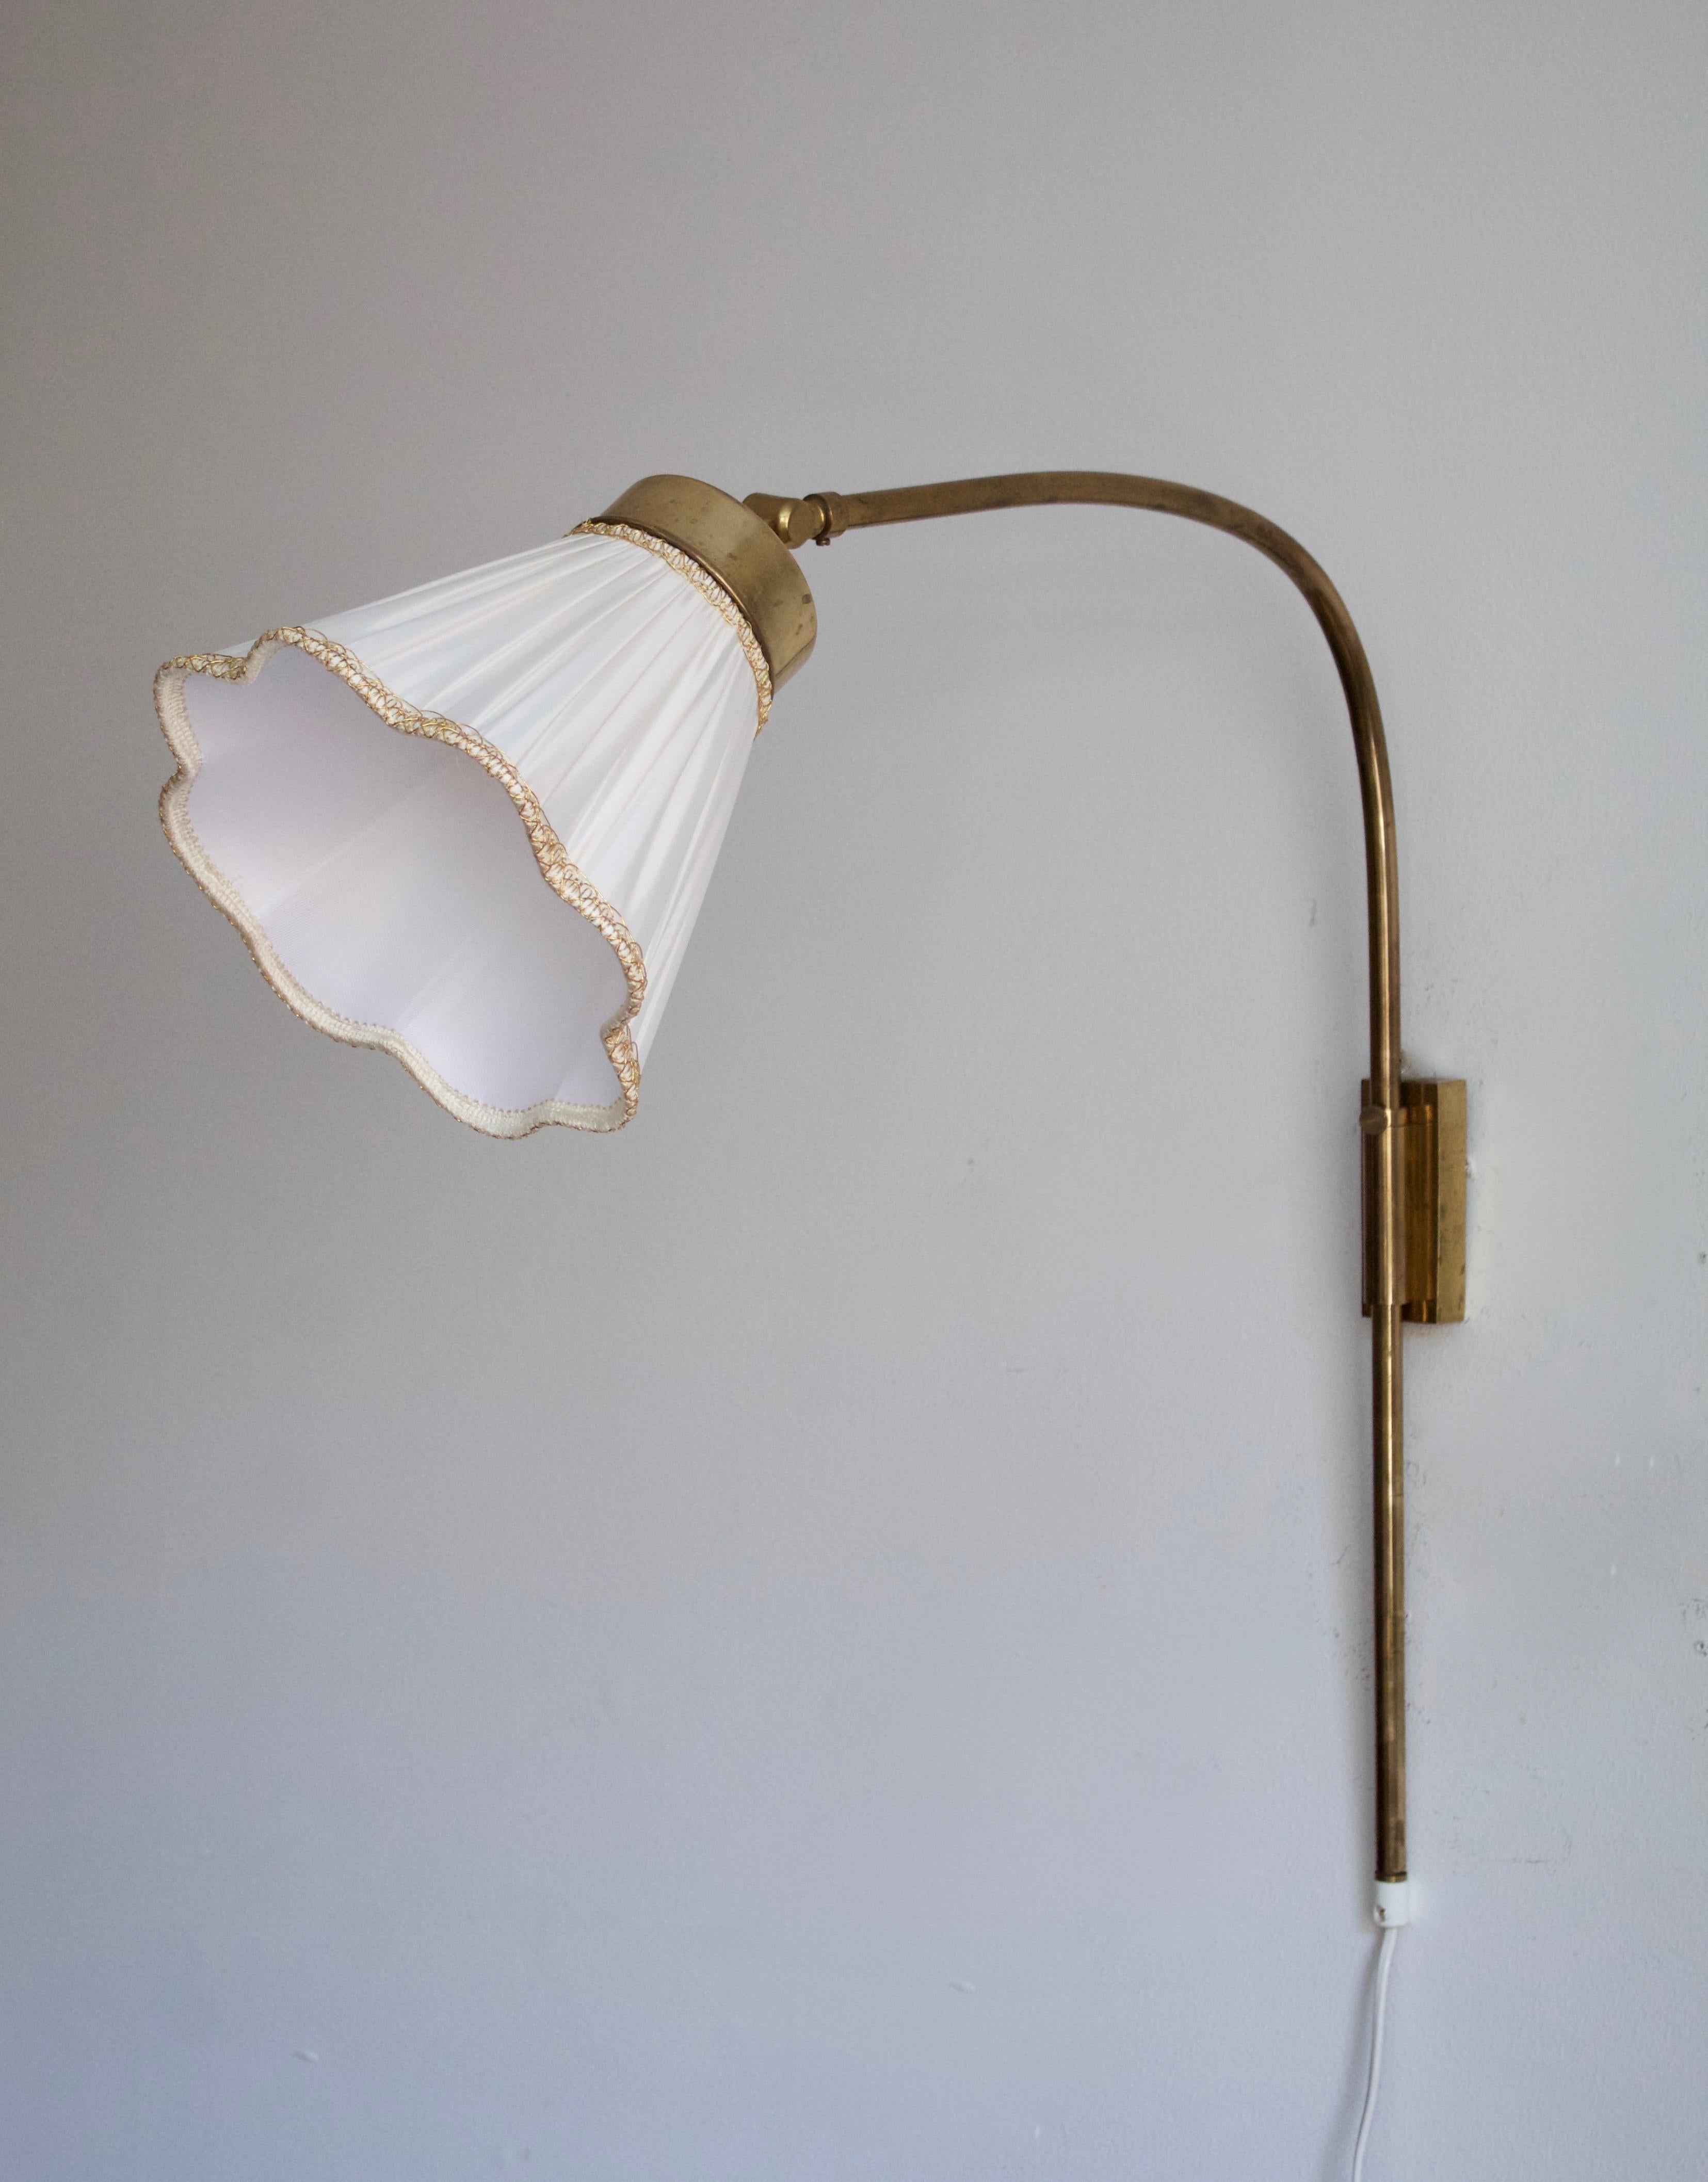 A pair of adjustable wall lights / sconces. Designed by Josef Frank, produced by Svenskt Tenn, Stockholm, Sweden, c. 1950s. Brand new high-end lampshades.

Stated dimensions include lampshades as is illustrated.

Other designers of the period